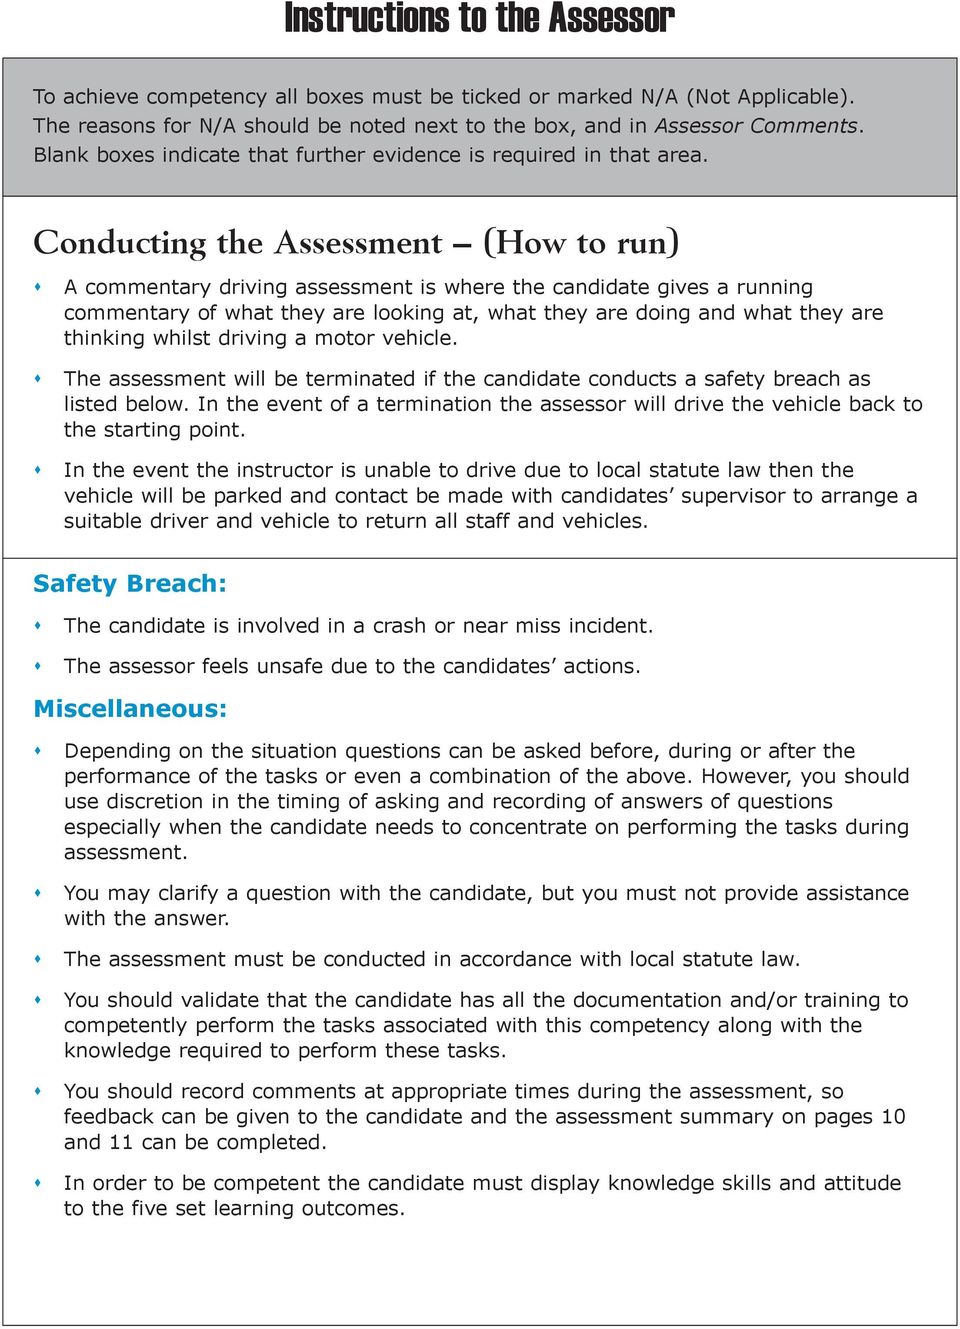 Conducting the Assessment (How to run) A commentary driving assessment is where the candidate gives a running commentary of what they are looking at, what they are doing and what they are thinking